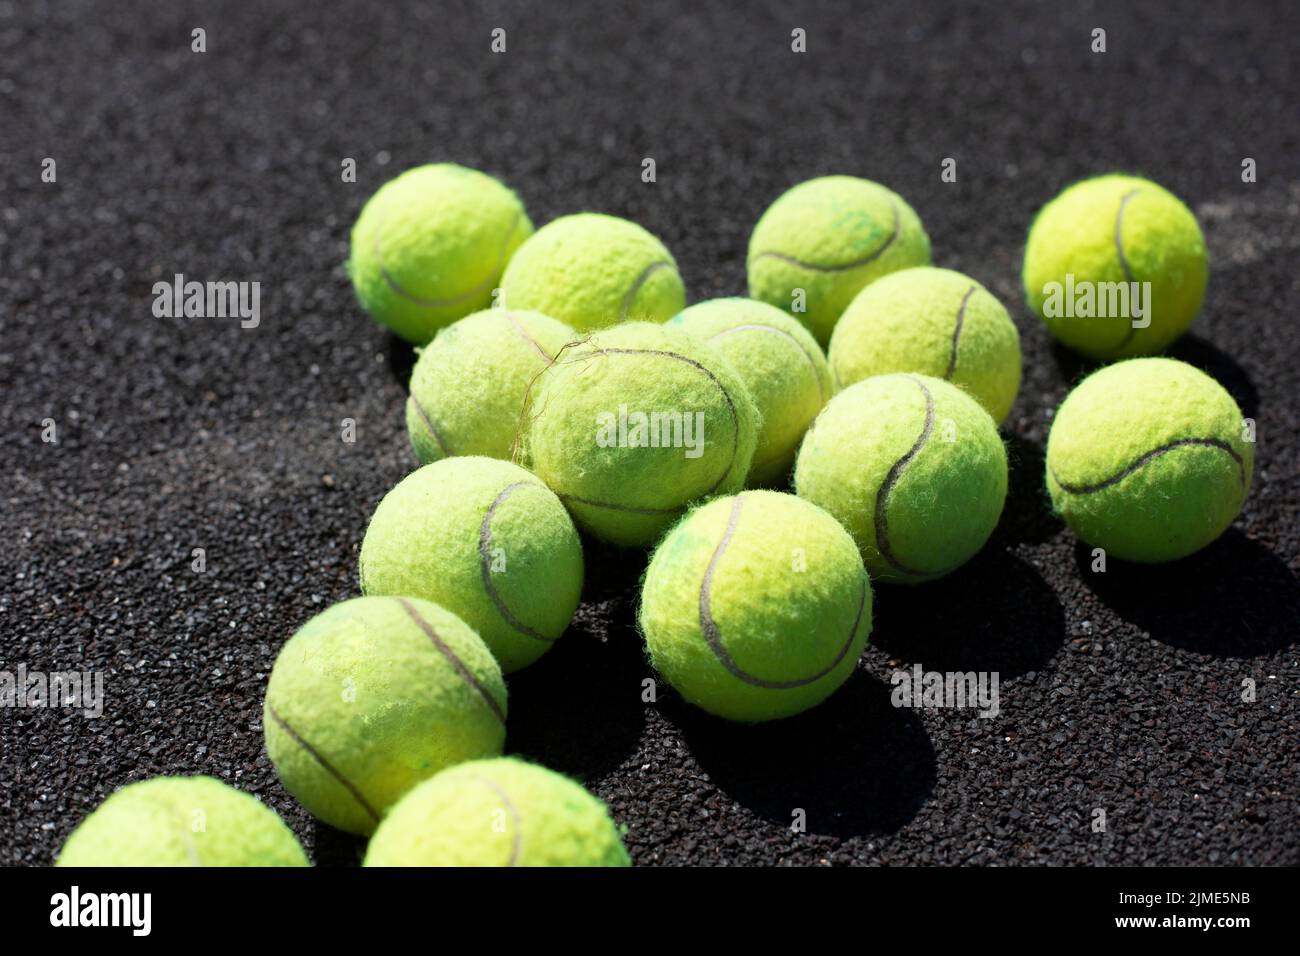 Tennis balls. The balls lie on the surface of the playground. Stock Photo